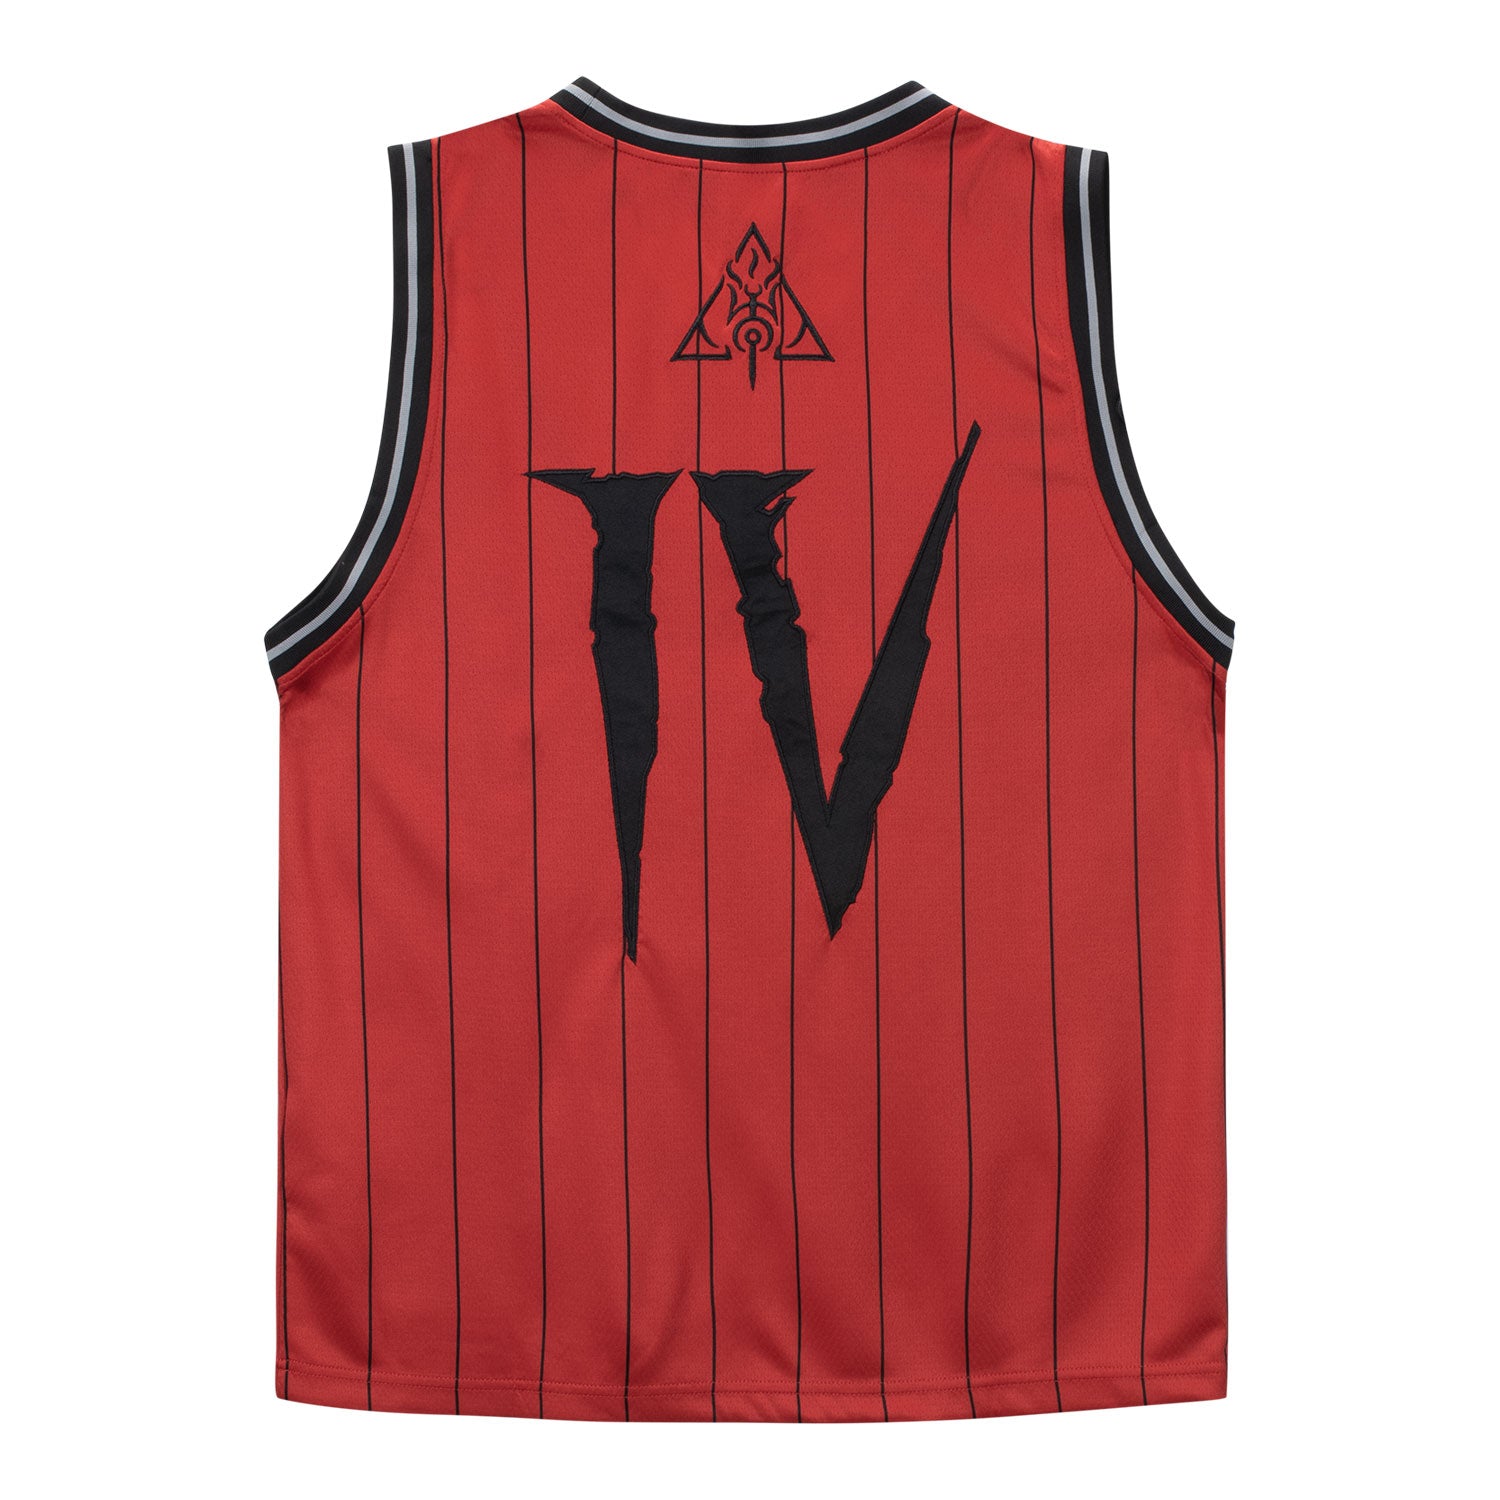 Diablo IV Red Basketball Jersey - Back View